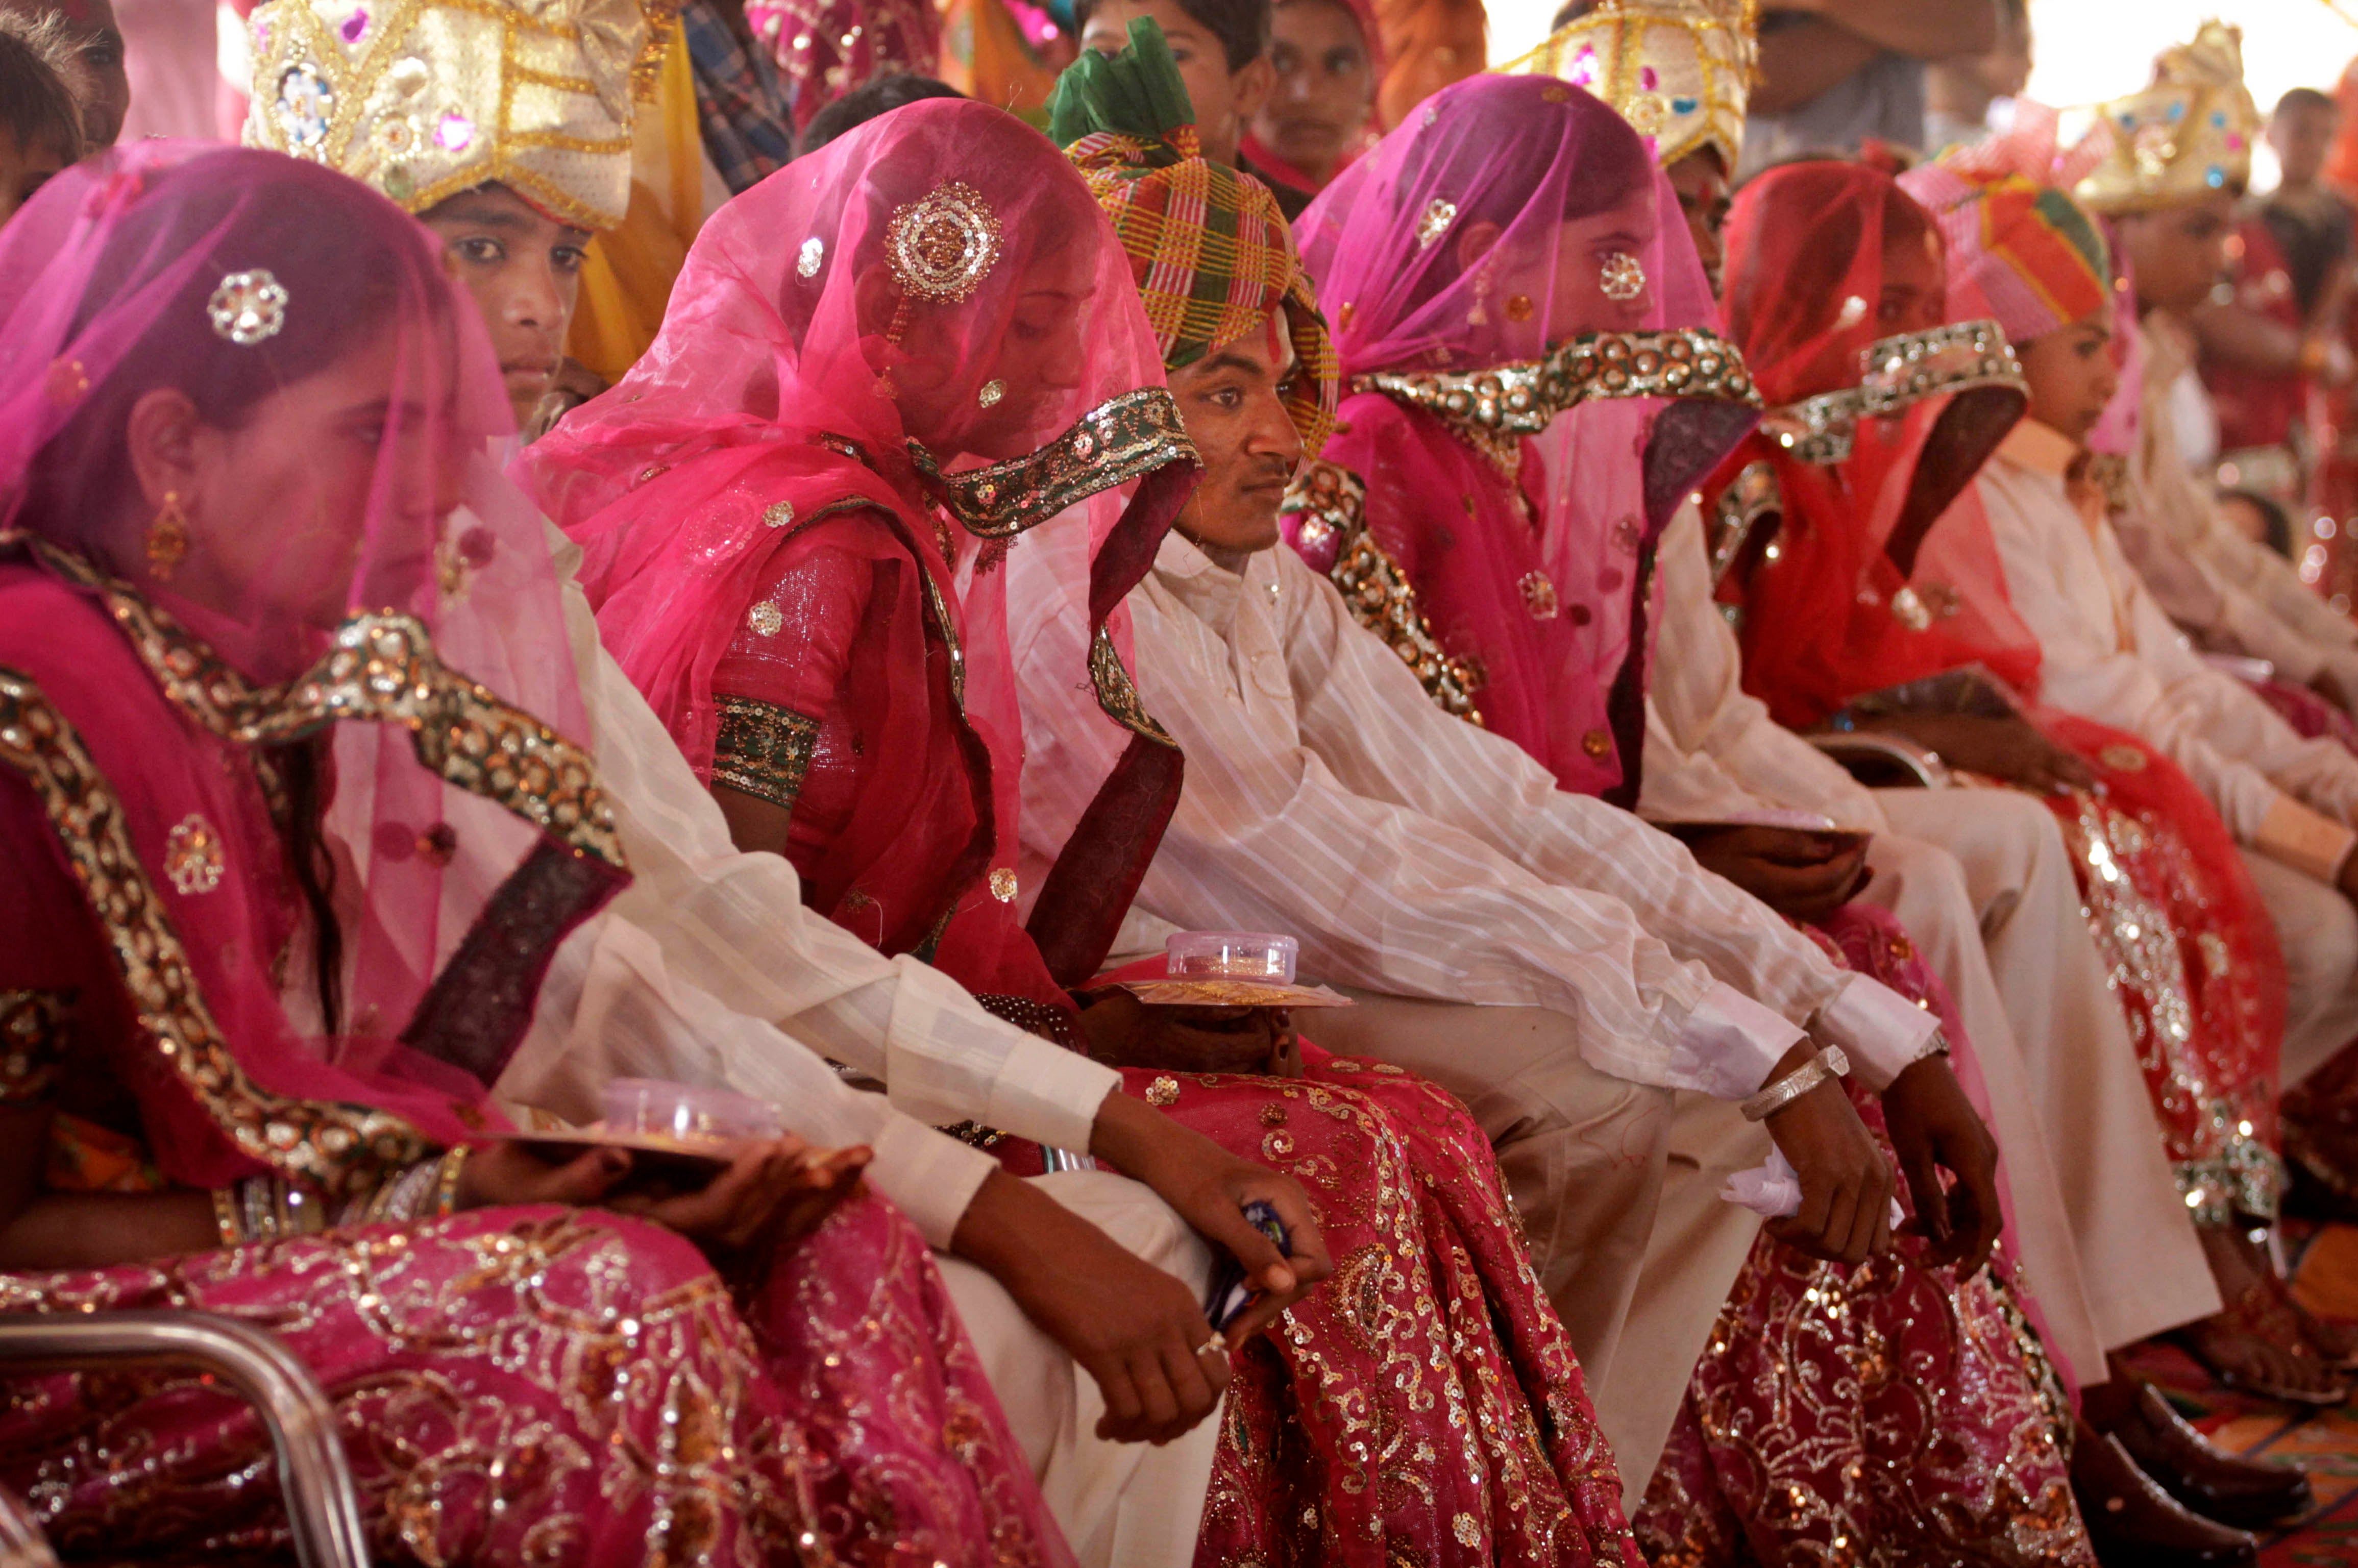 Representational image: South Asia accounts for 45% of child brides